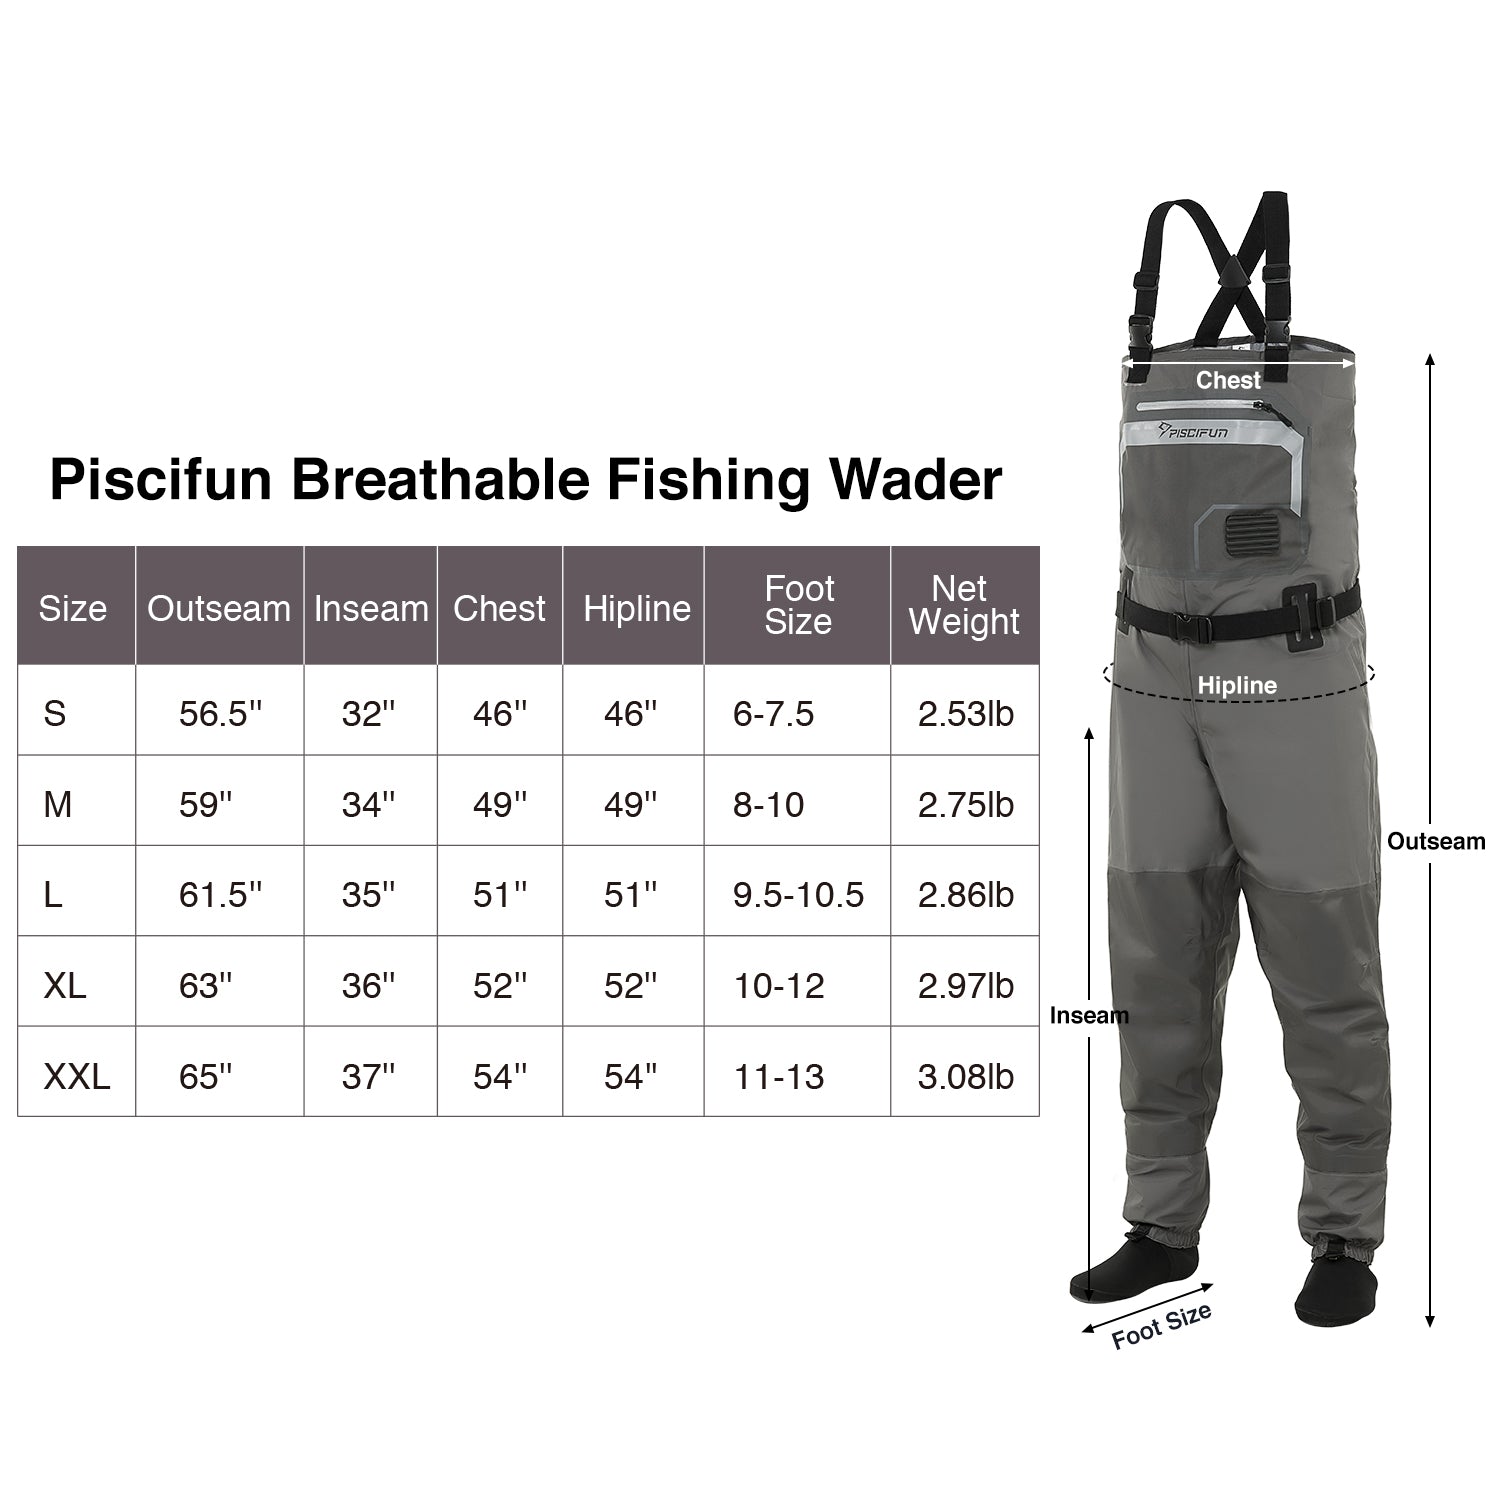 Piscifun® Breathable Chest Waders Stocking Foot Waders Fishing Waders